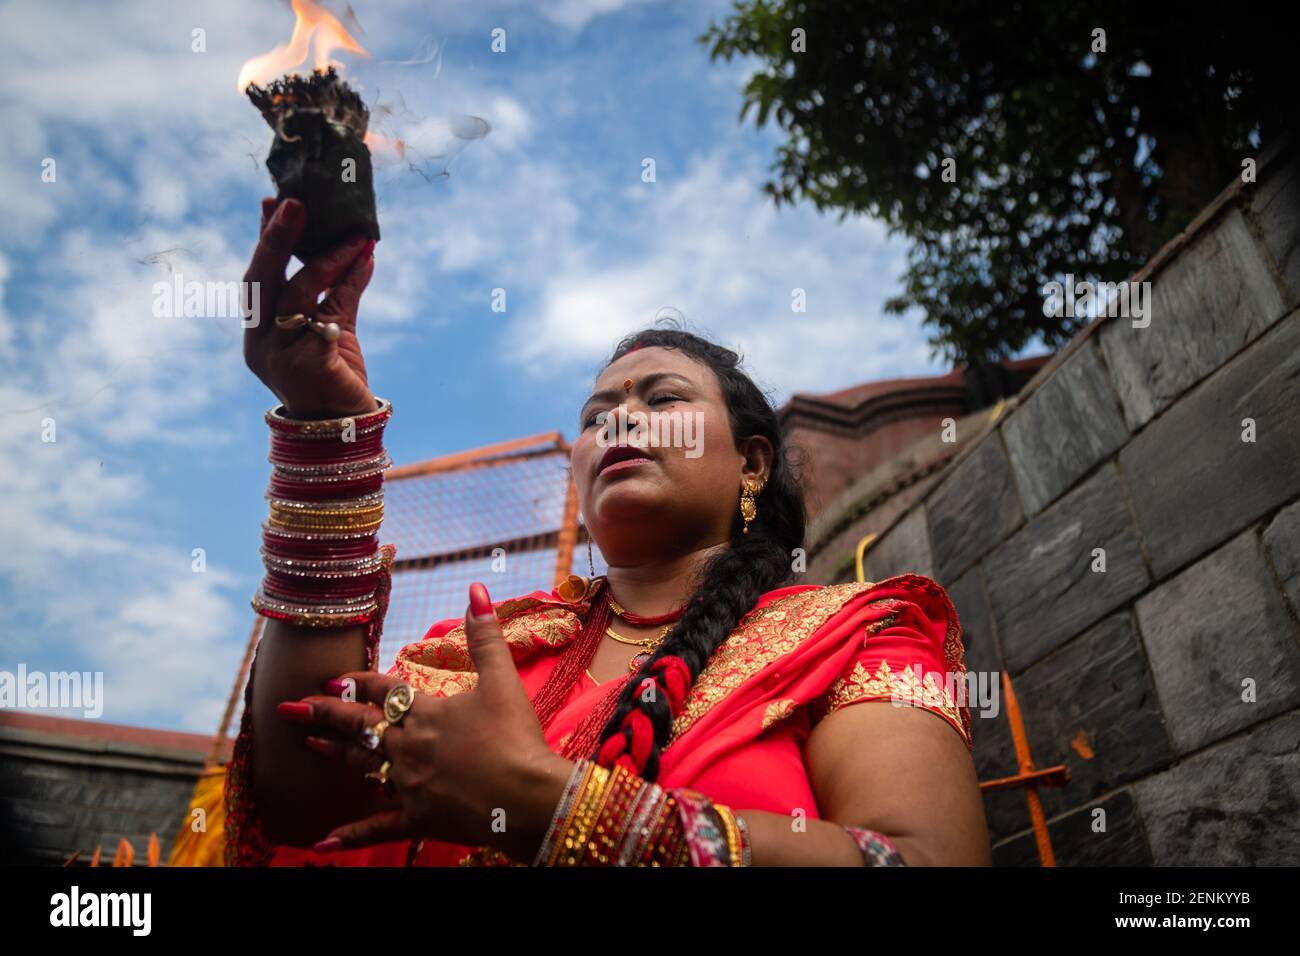 a Nepalese Hindu woman holding a lamp offers prayers at premises of  Pashupatinath Temple during a Teej festival in Kathmandu,Nepal on Monday,2  September 2019. During this festival, Hindu women observe a day-long